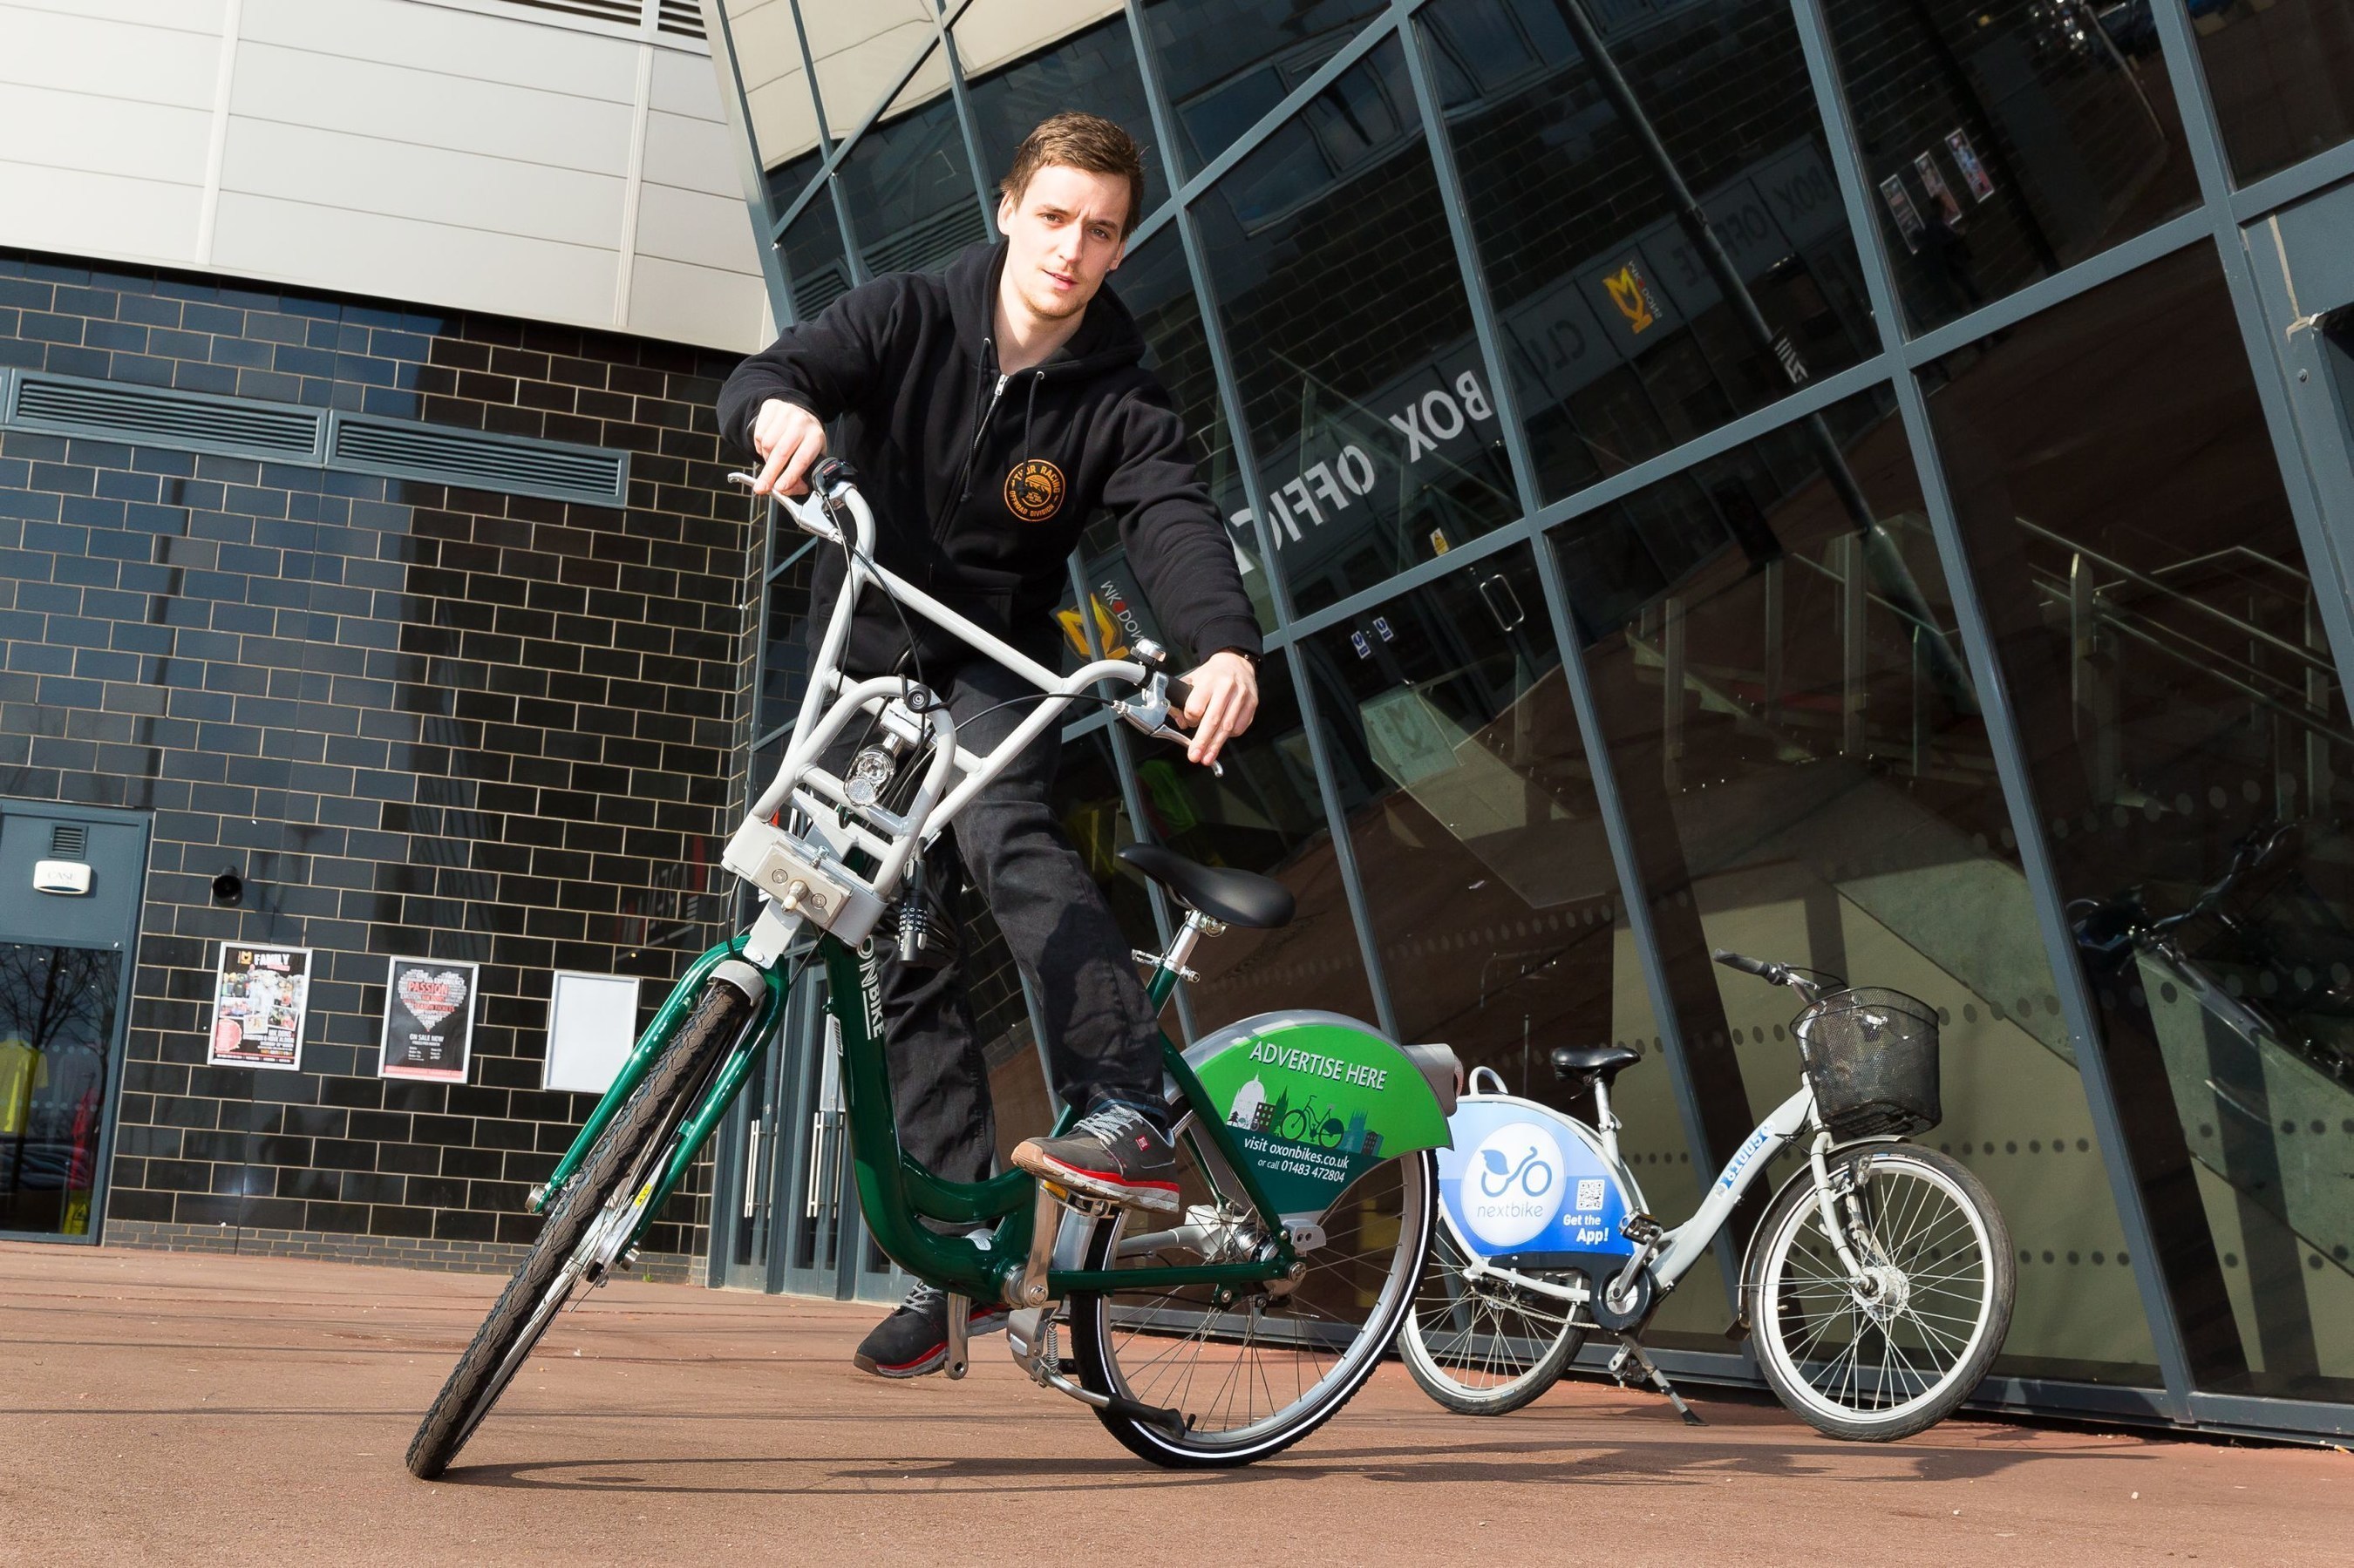 10 million rides later... New organisation Bikeplus launched today to grow the network of public bike share schemes in towns and cities across the UK (PRNewsFoto/Carplus) (PRNewsFoto/Carplus)